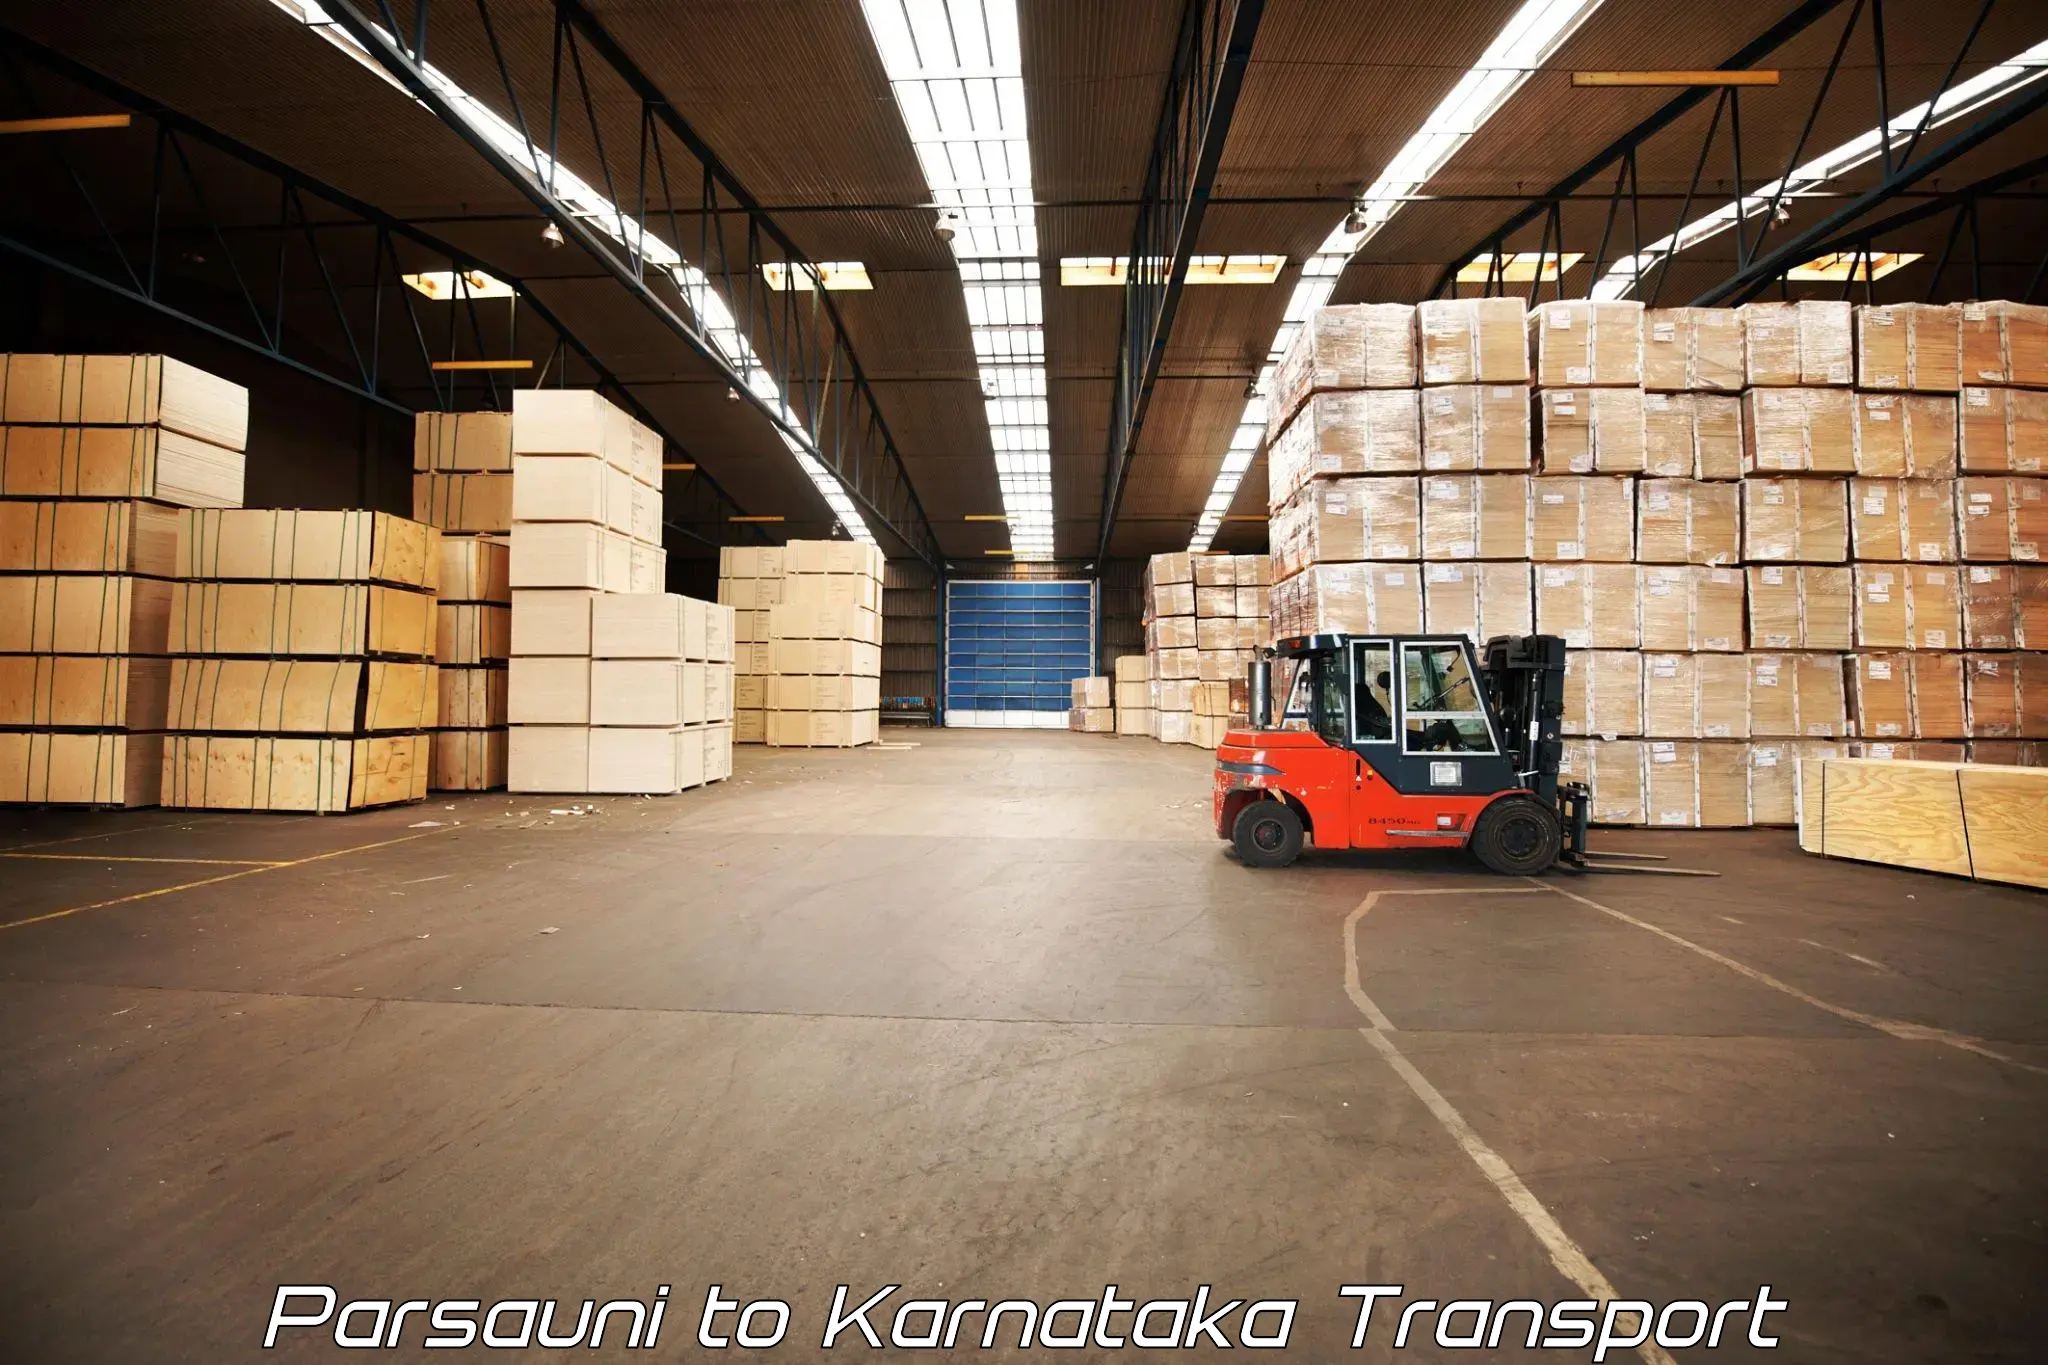 Air freight transport services in Parsauni to Yellare